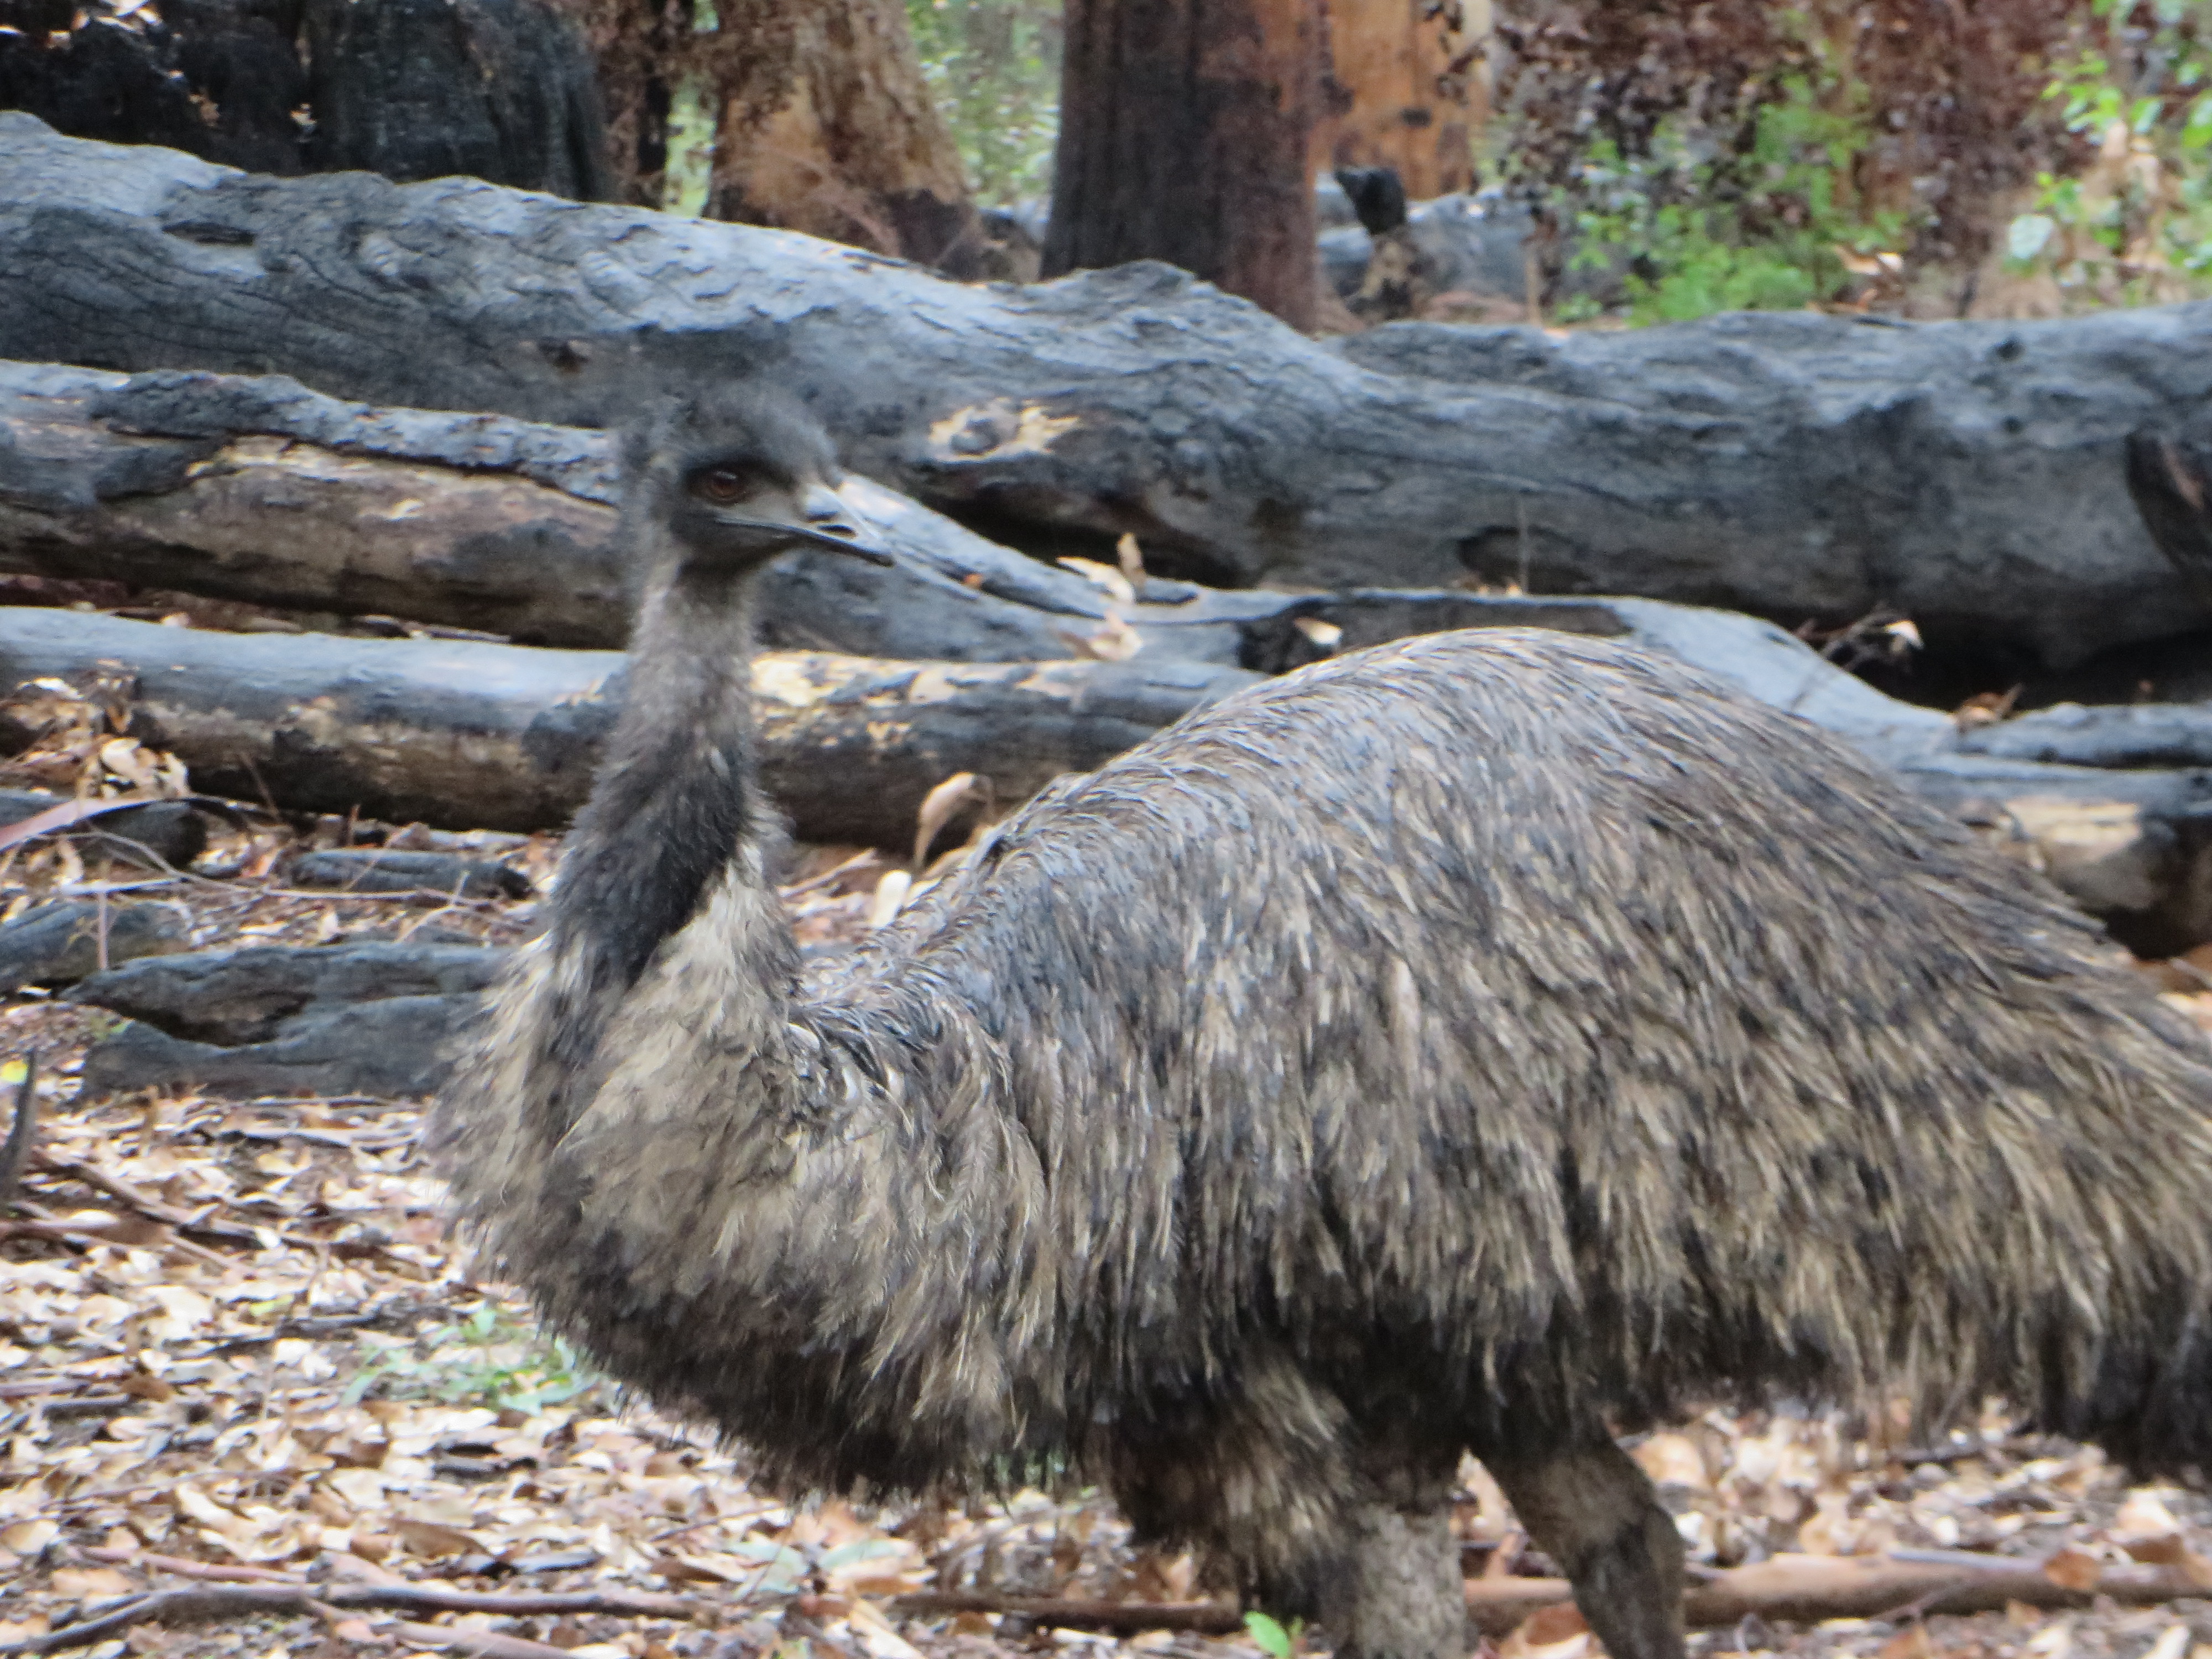   Emu in thinned and burned Kari forest by Scott Stephens